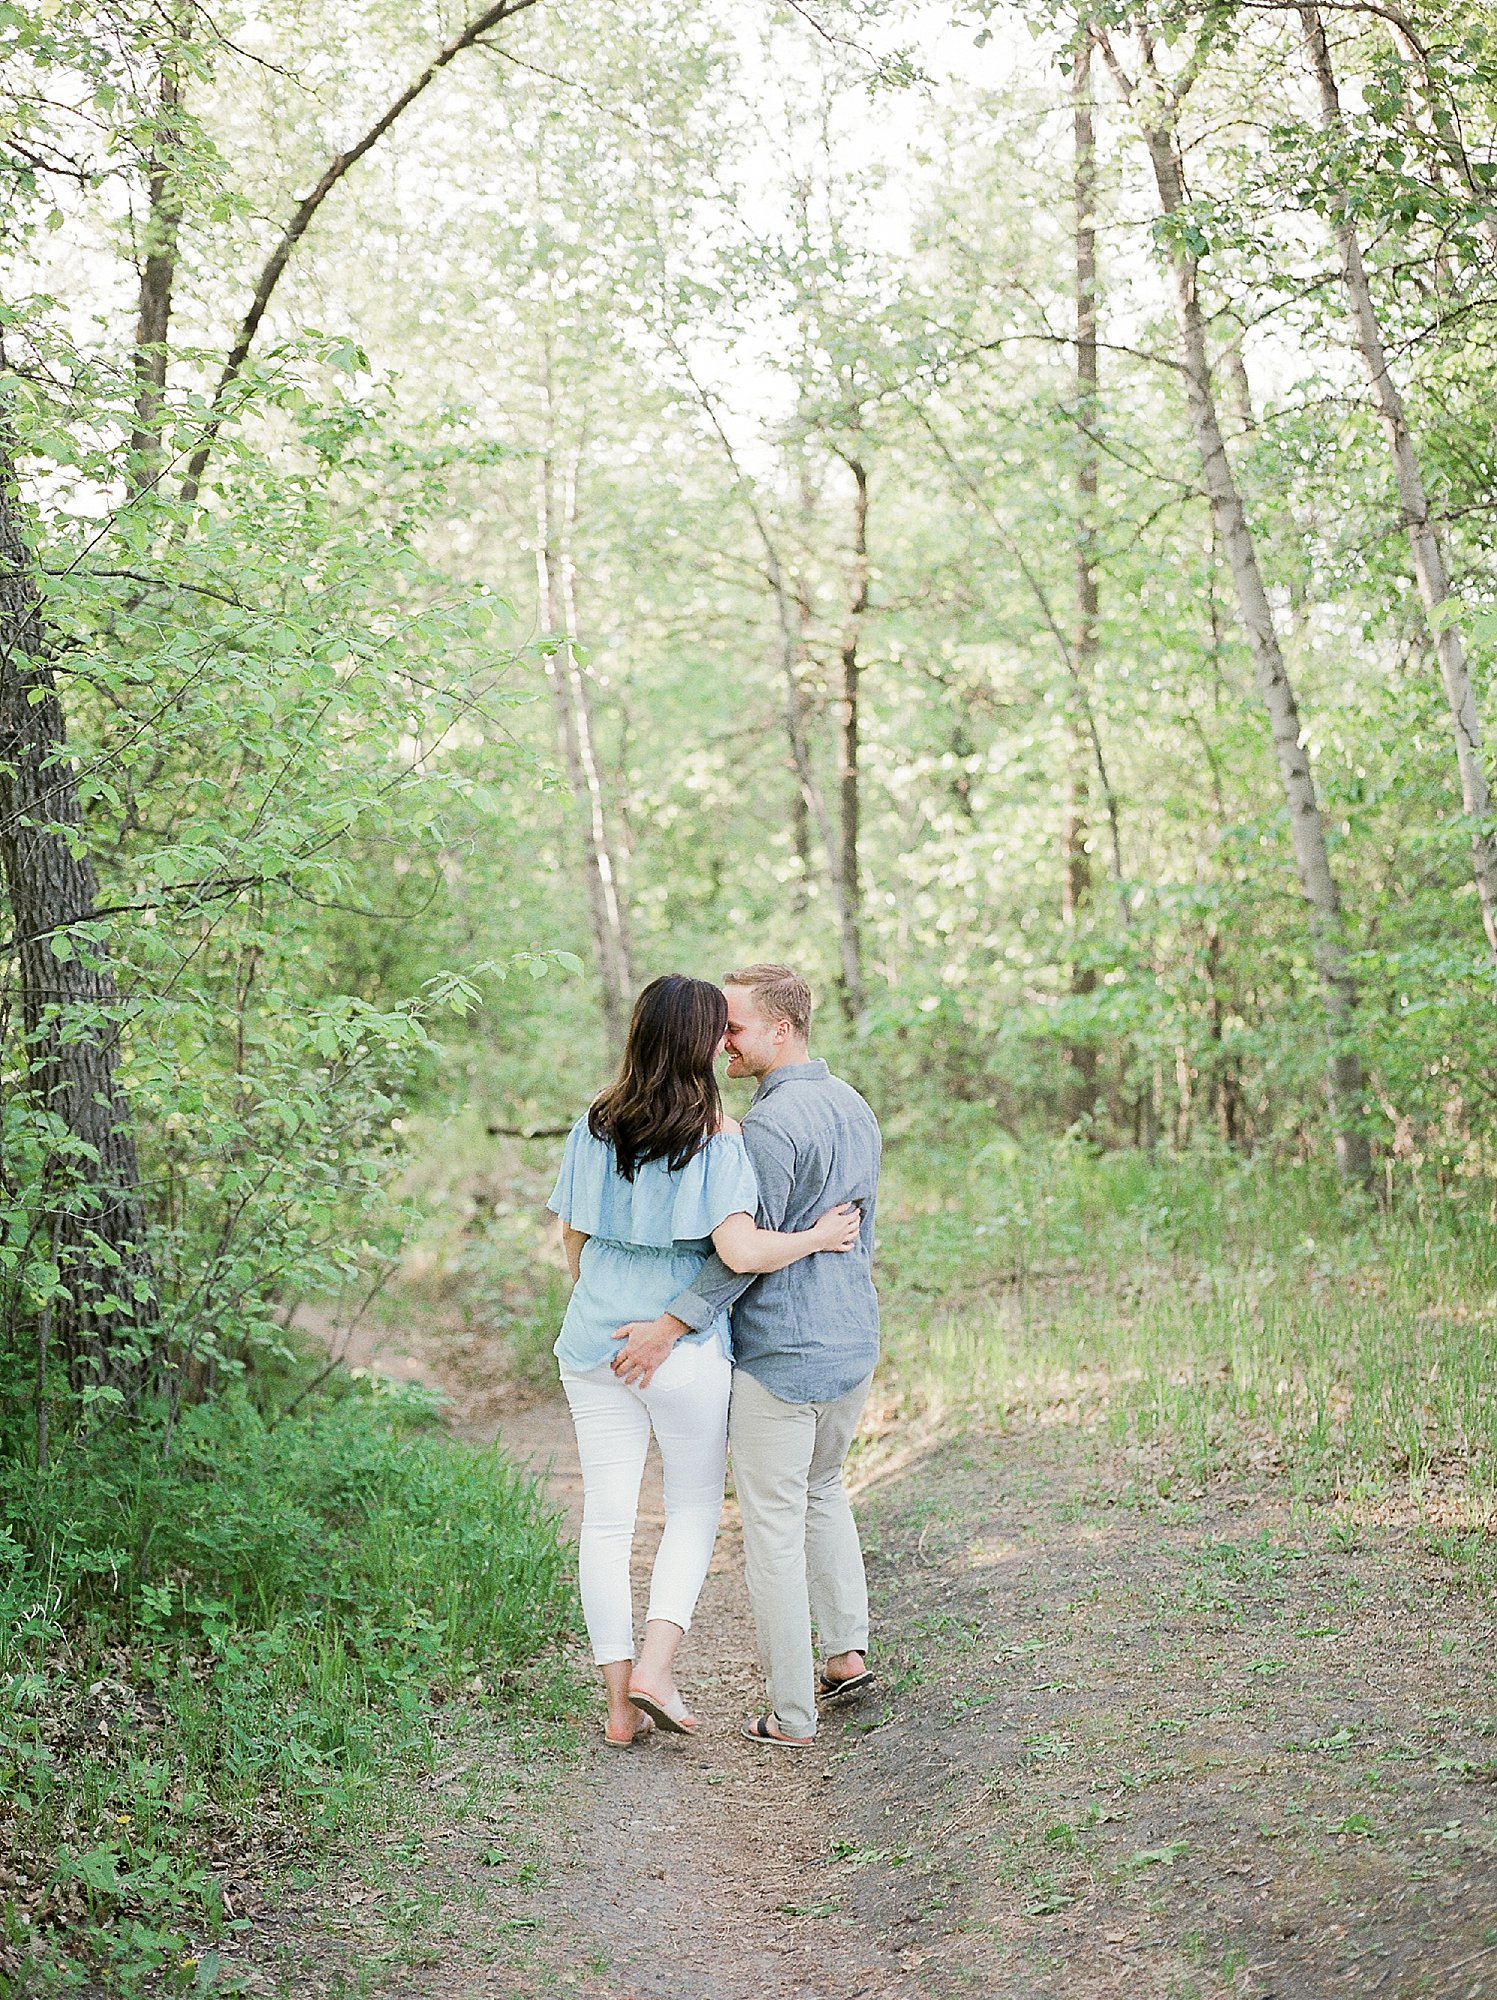 fun engagement photo poses, engagement session outfit ideas for summer, engagement photos at a park, kings park winnipeg, denim over the shoulder top, 